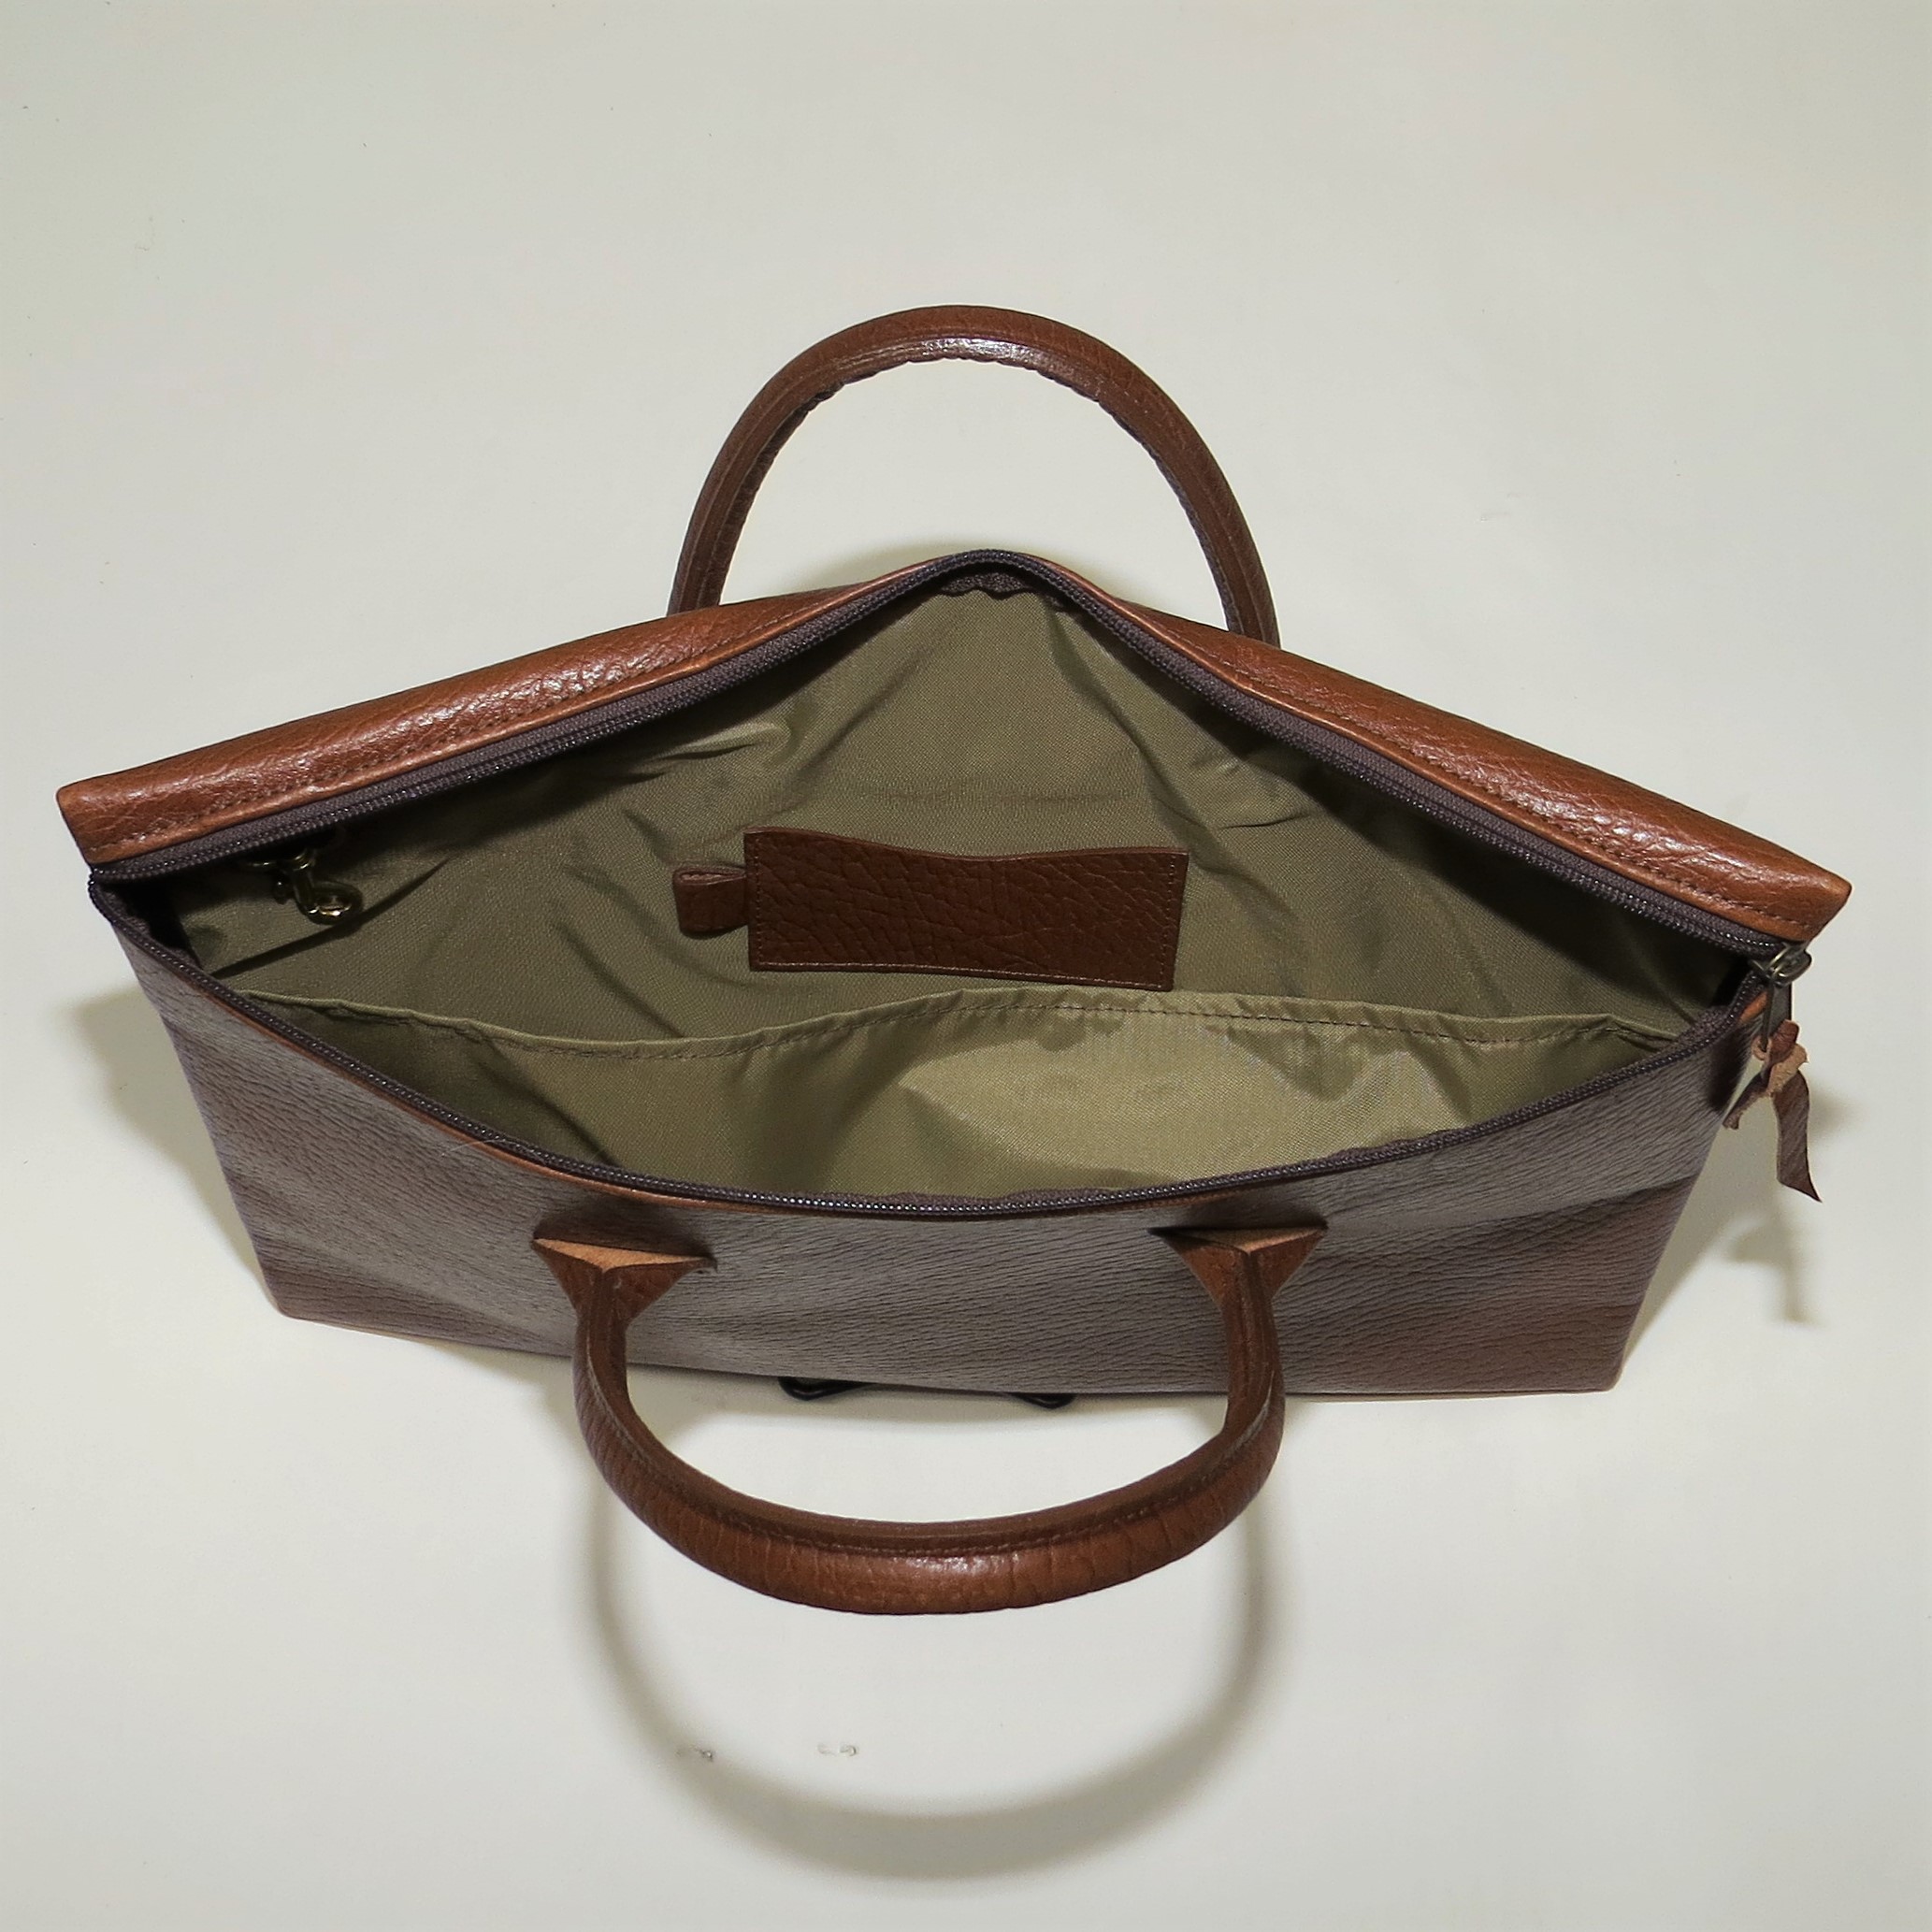 Deluxe Legal Brief with Leather Trim and Handles